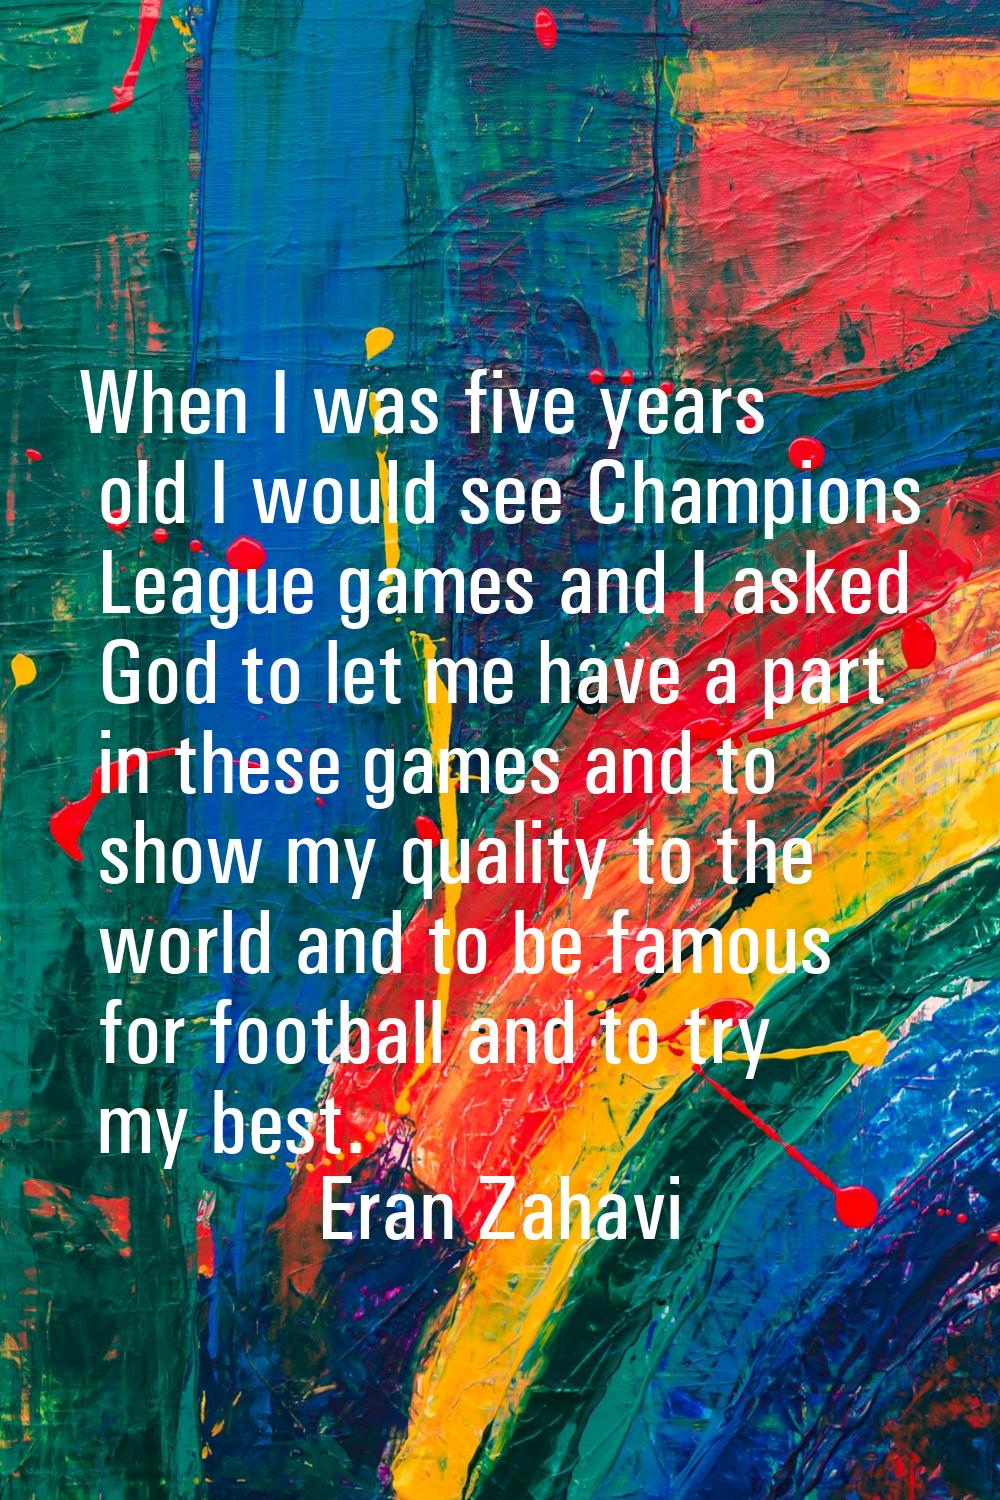 When I was five years old I would see Champions League games and I asked God to let me have a part 